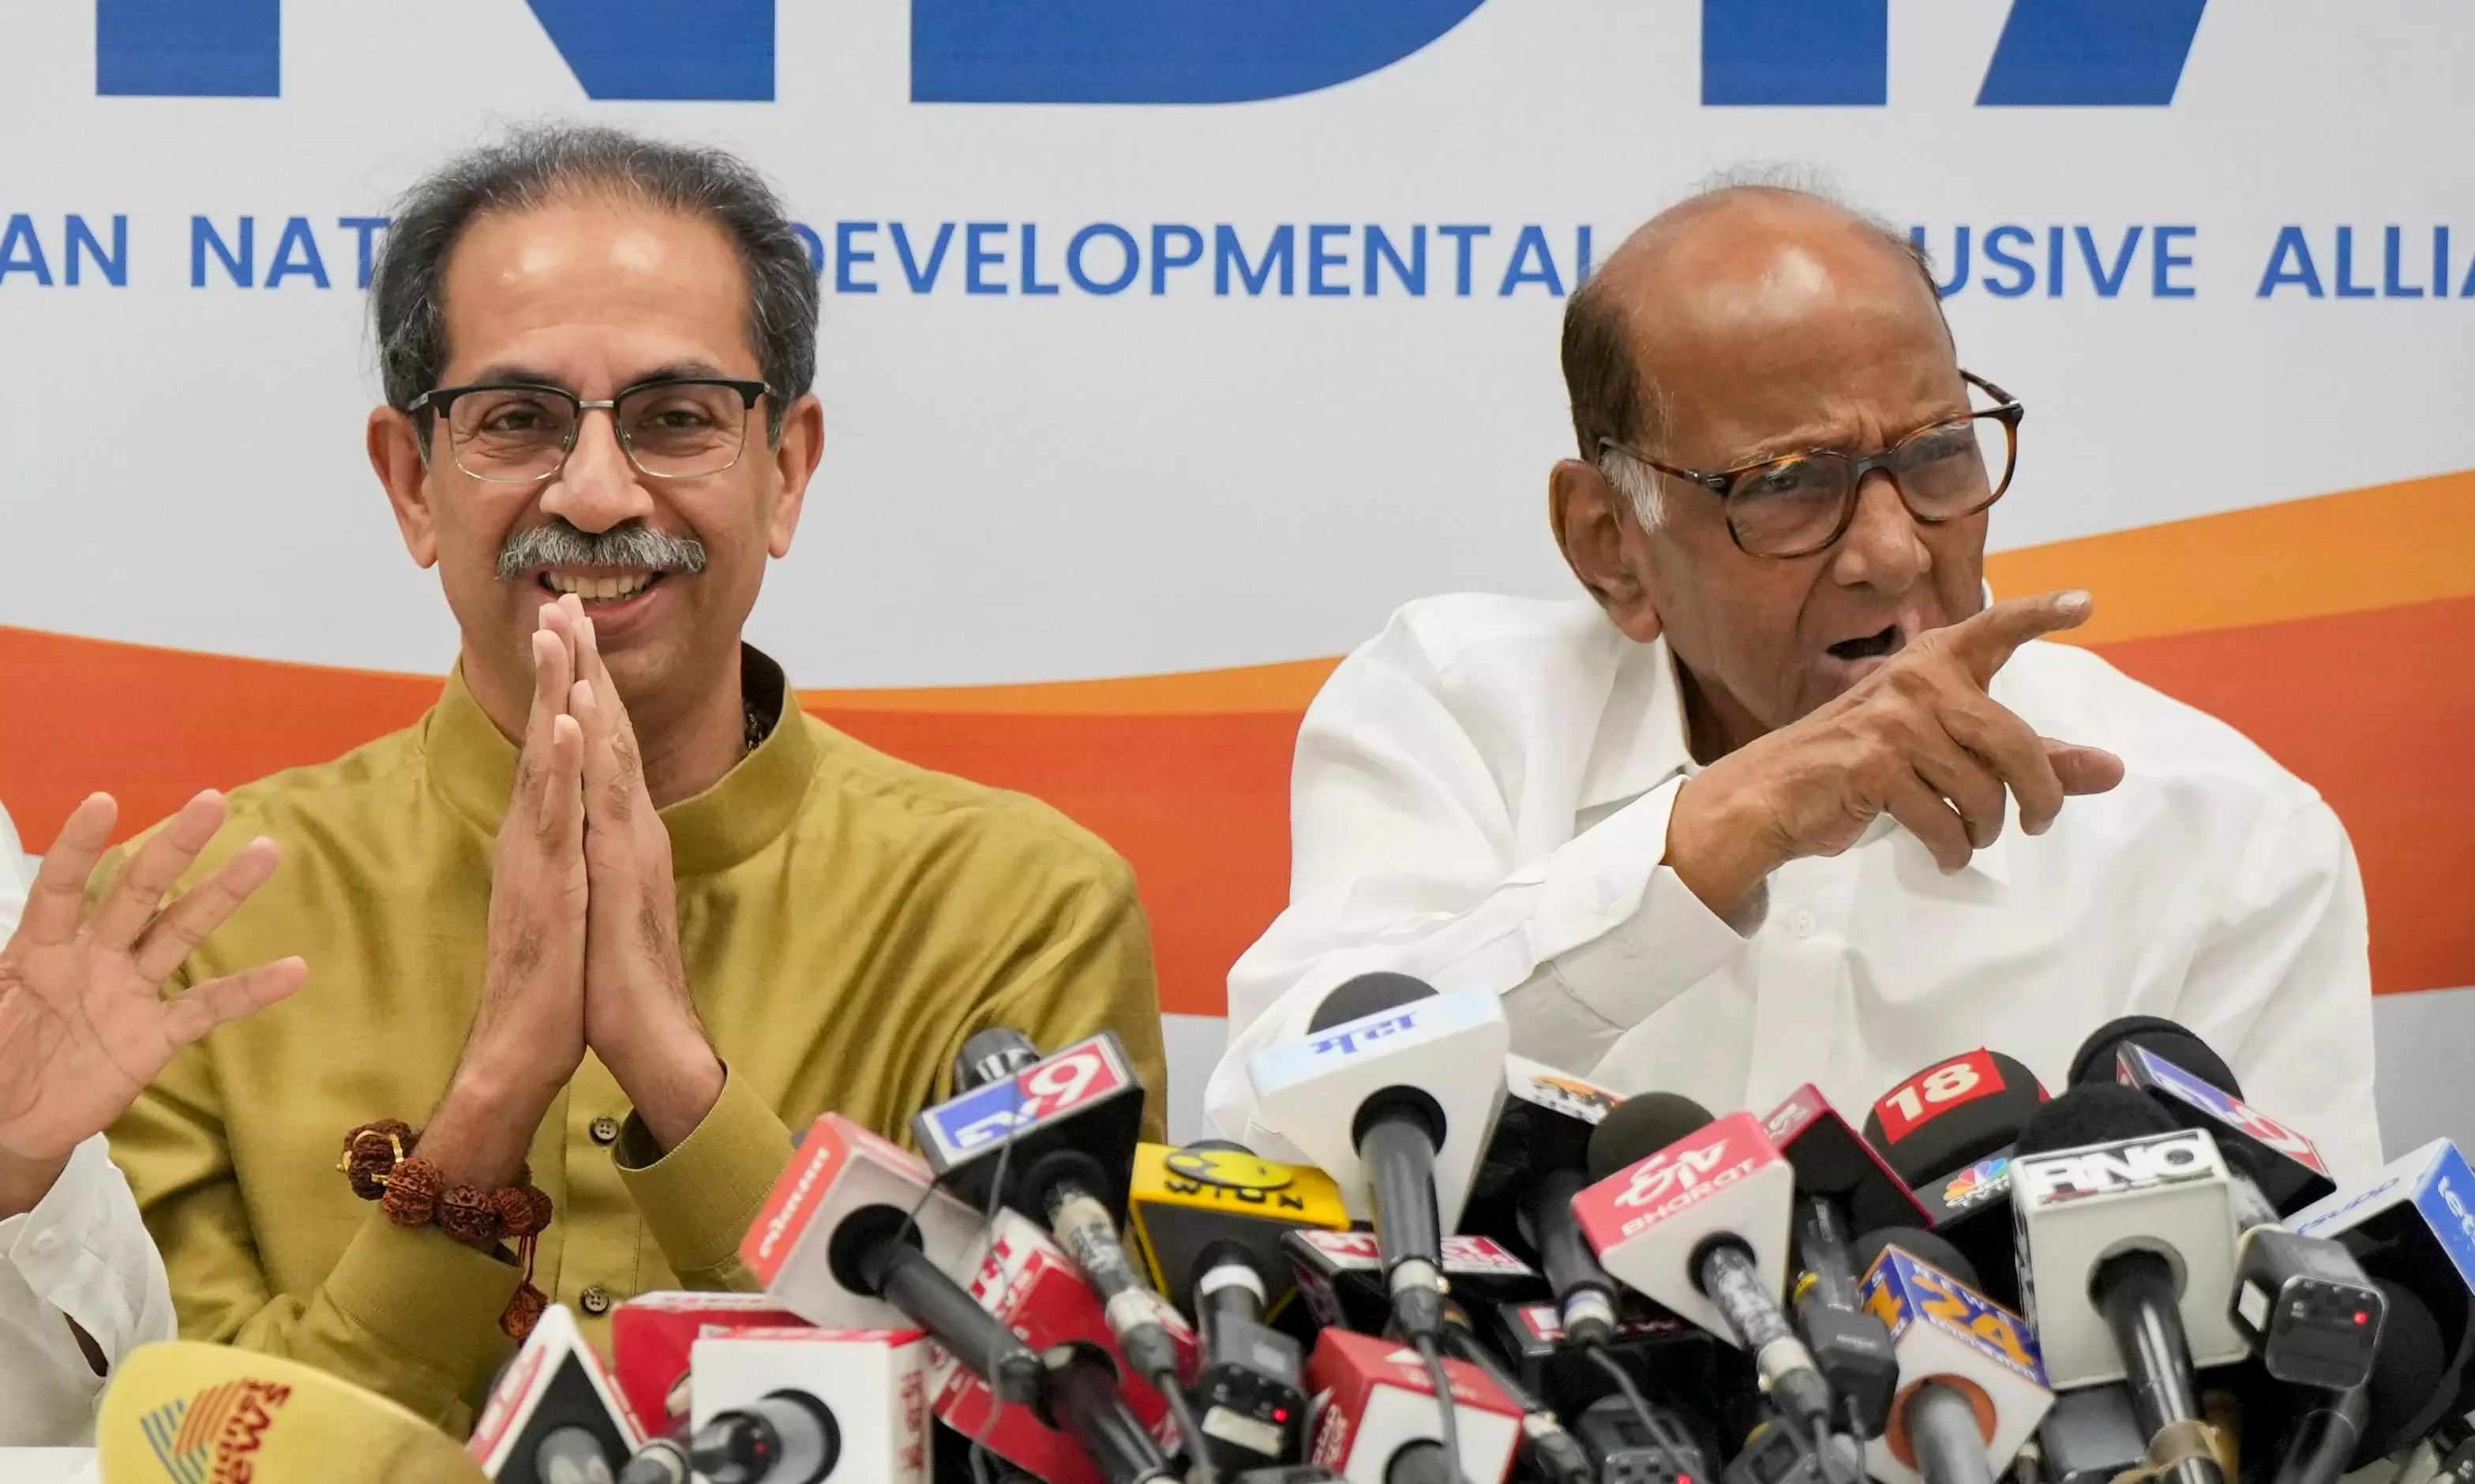 Congress Gives up on Contentious Seats, Shiv Sena UBT Gets Highest Share